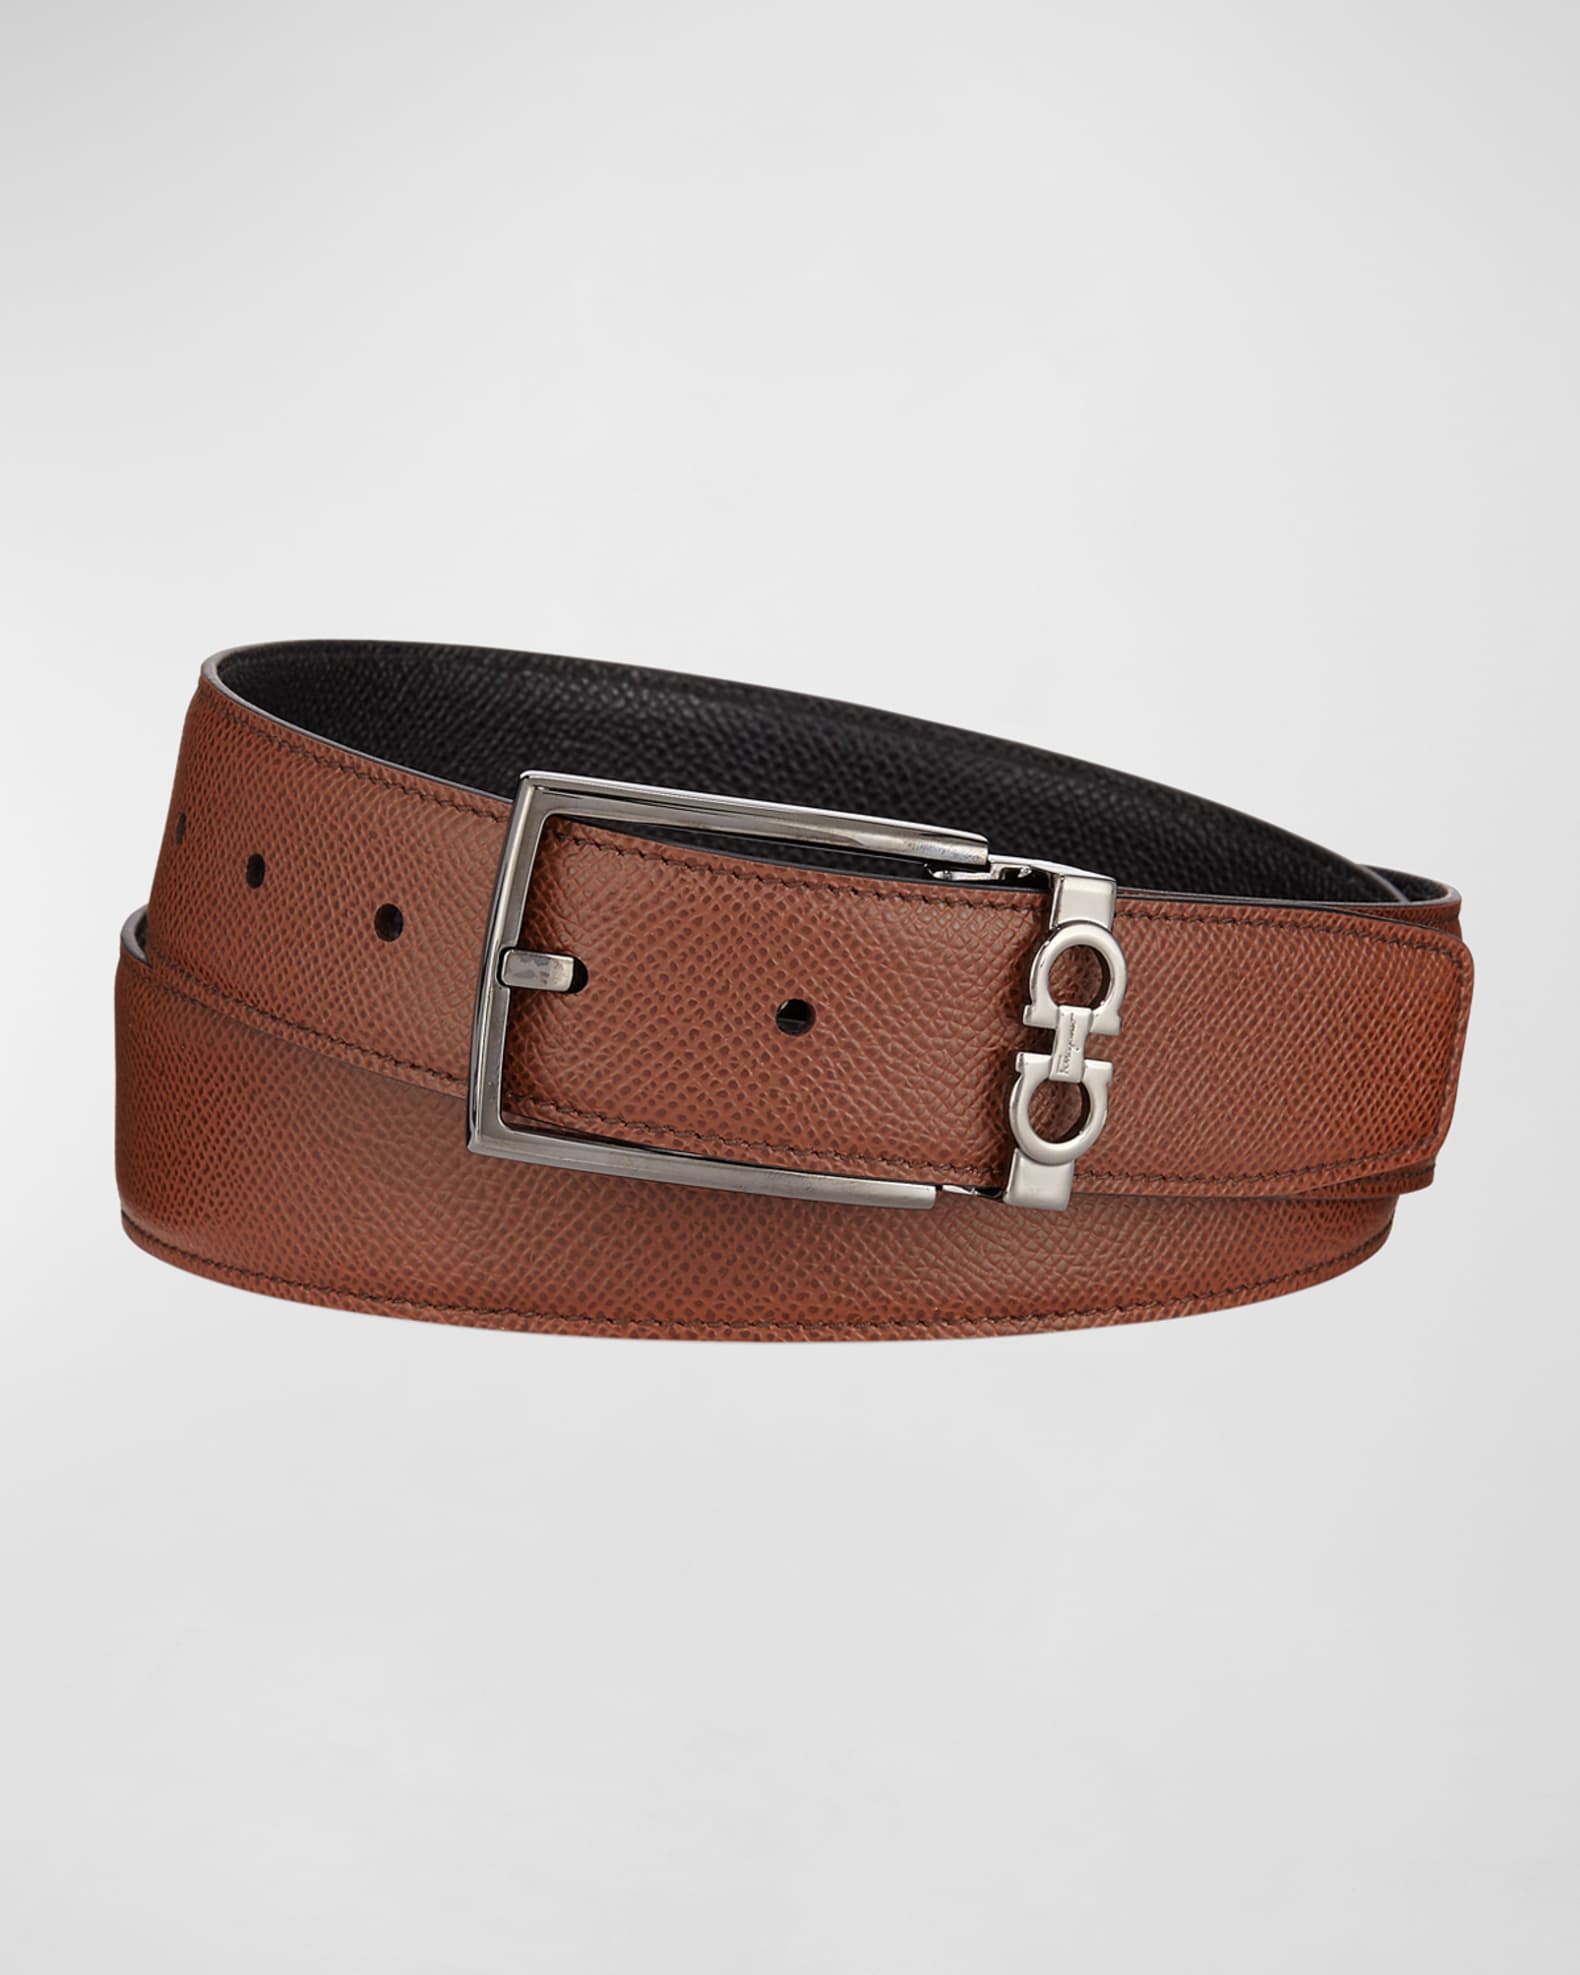 Men's Textured Leather Belt with Gancini Detail